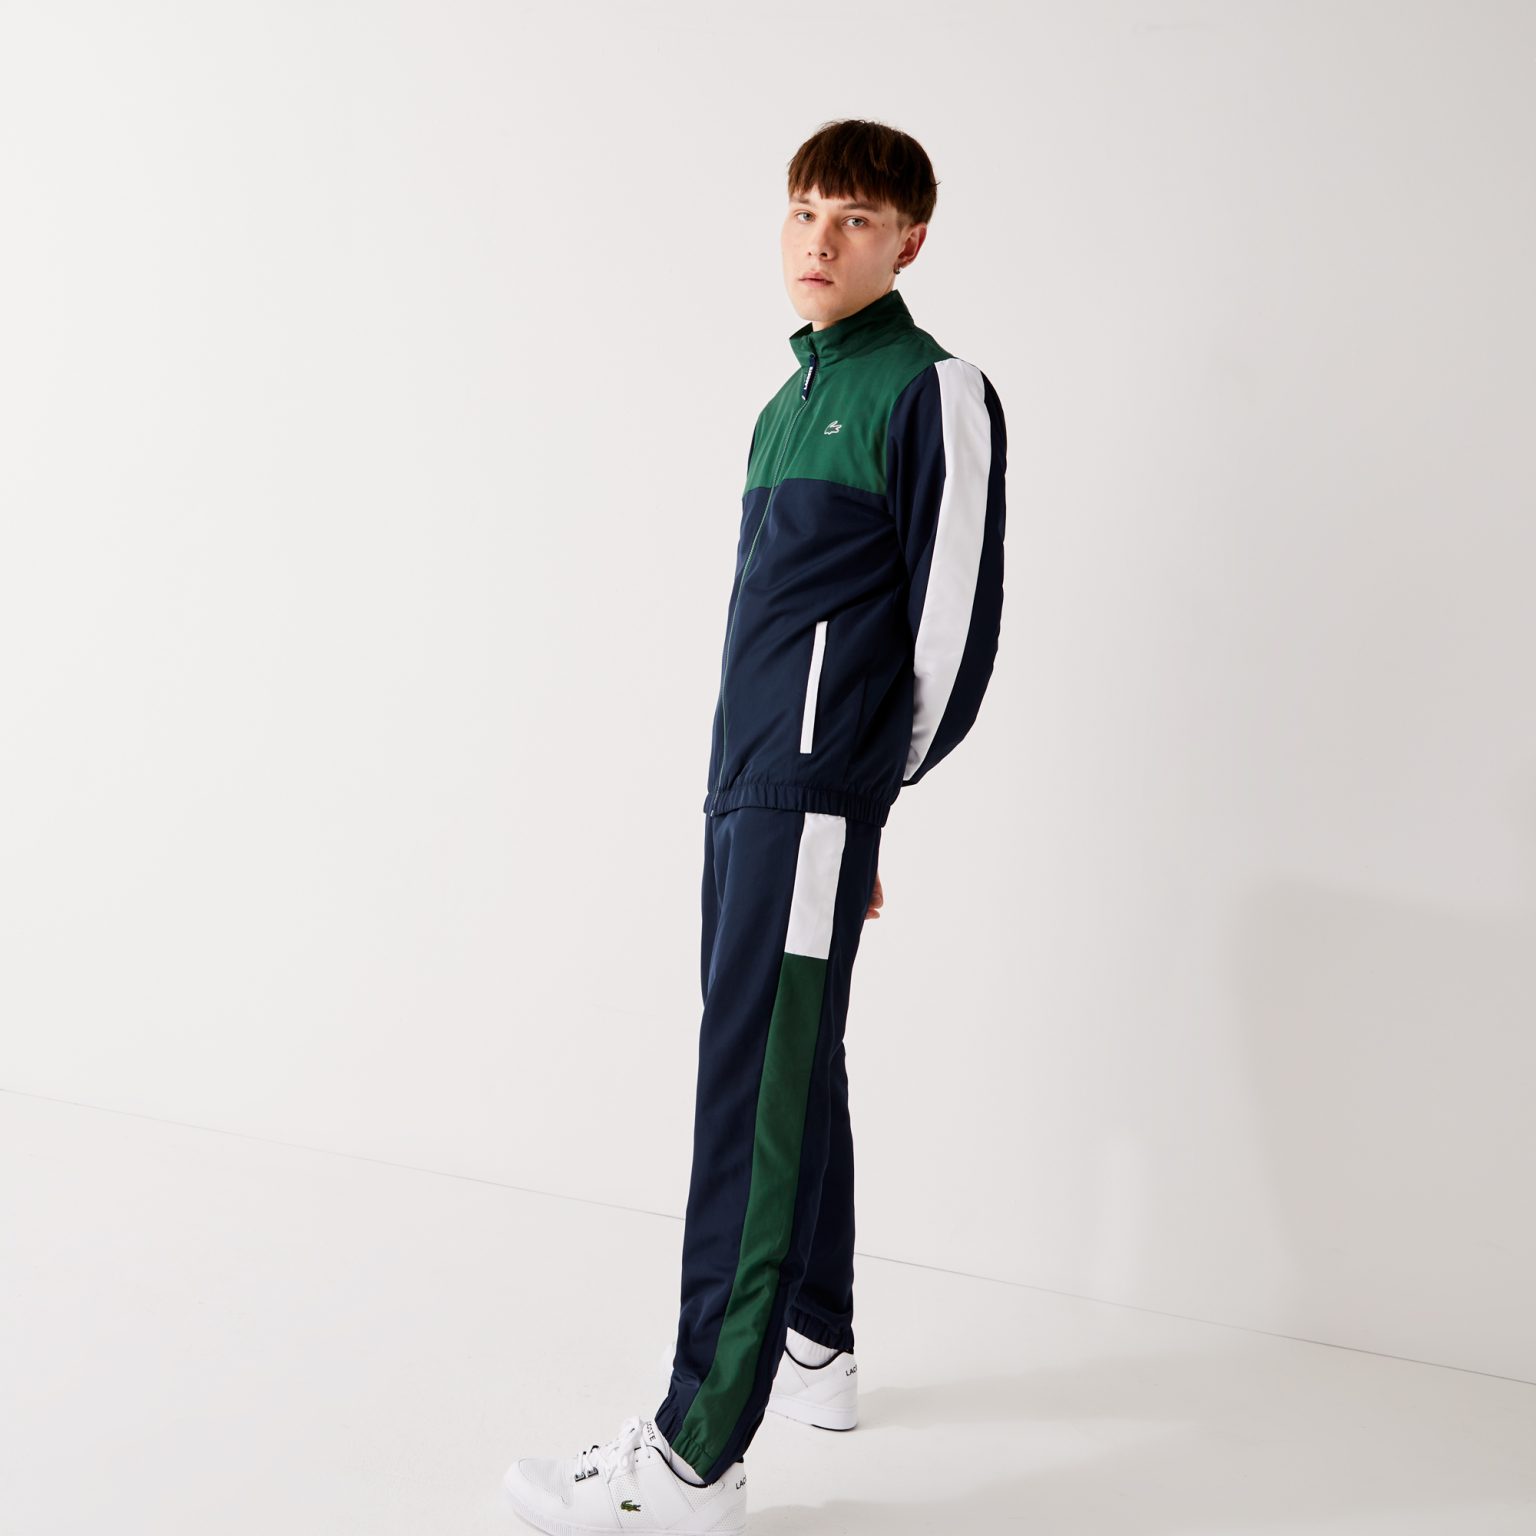 Lacoste Tracksuit White